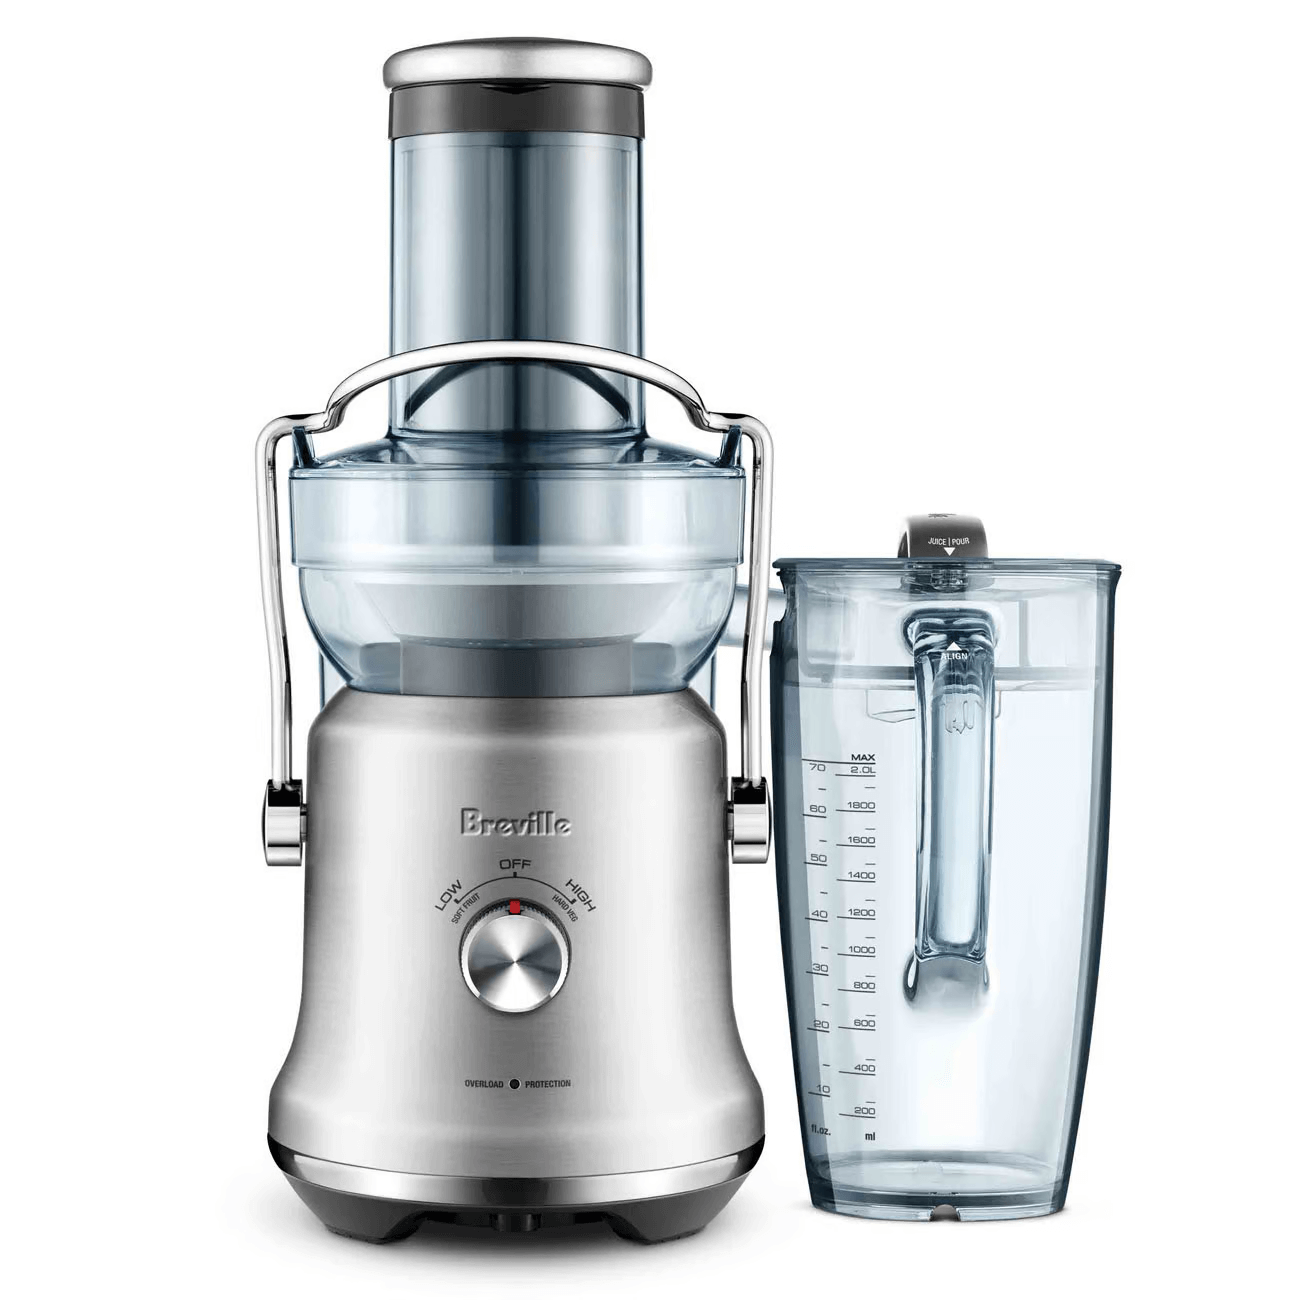 Breville's Juice Fountain Cold is the juicer for preserving the integrity of your fruits and vegetables. Enjoy chilled, fresh juices every time with its innovative cold extraction technology. Our juicer picks.